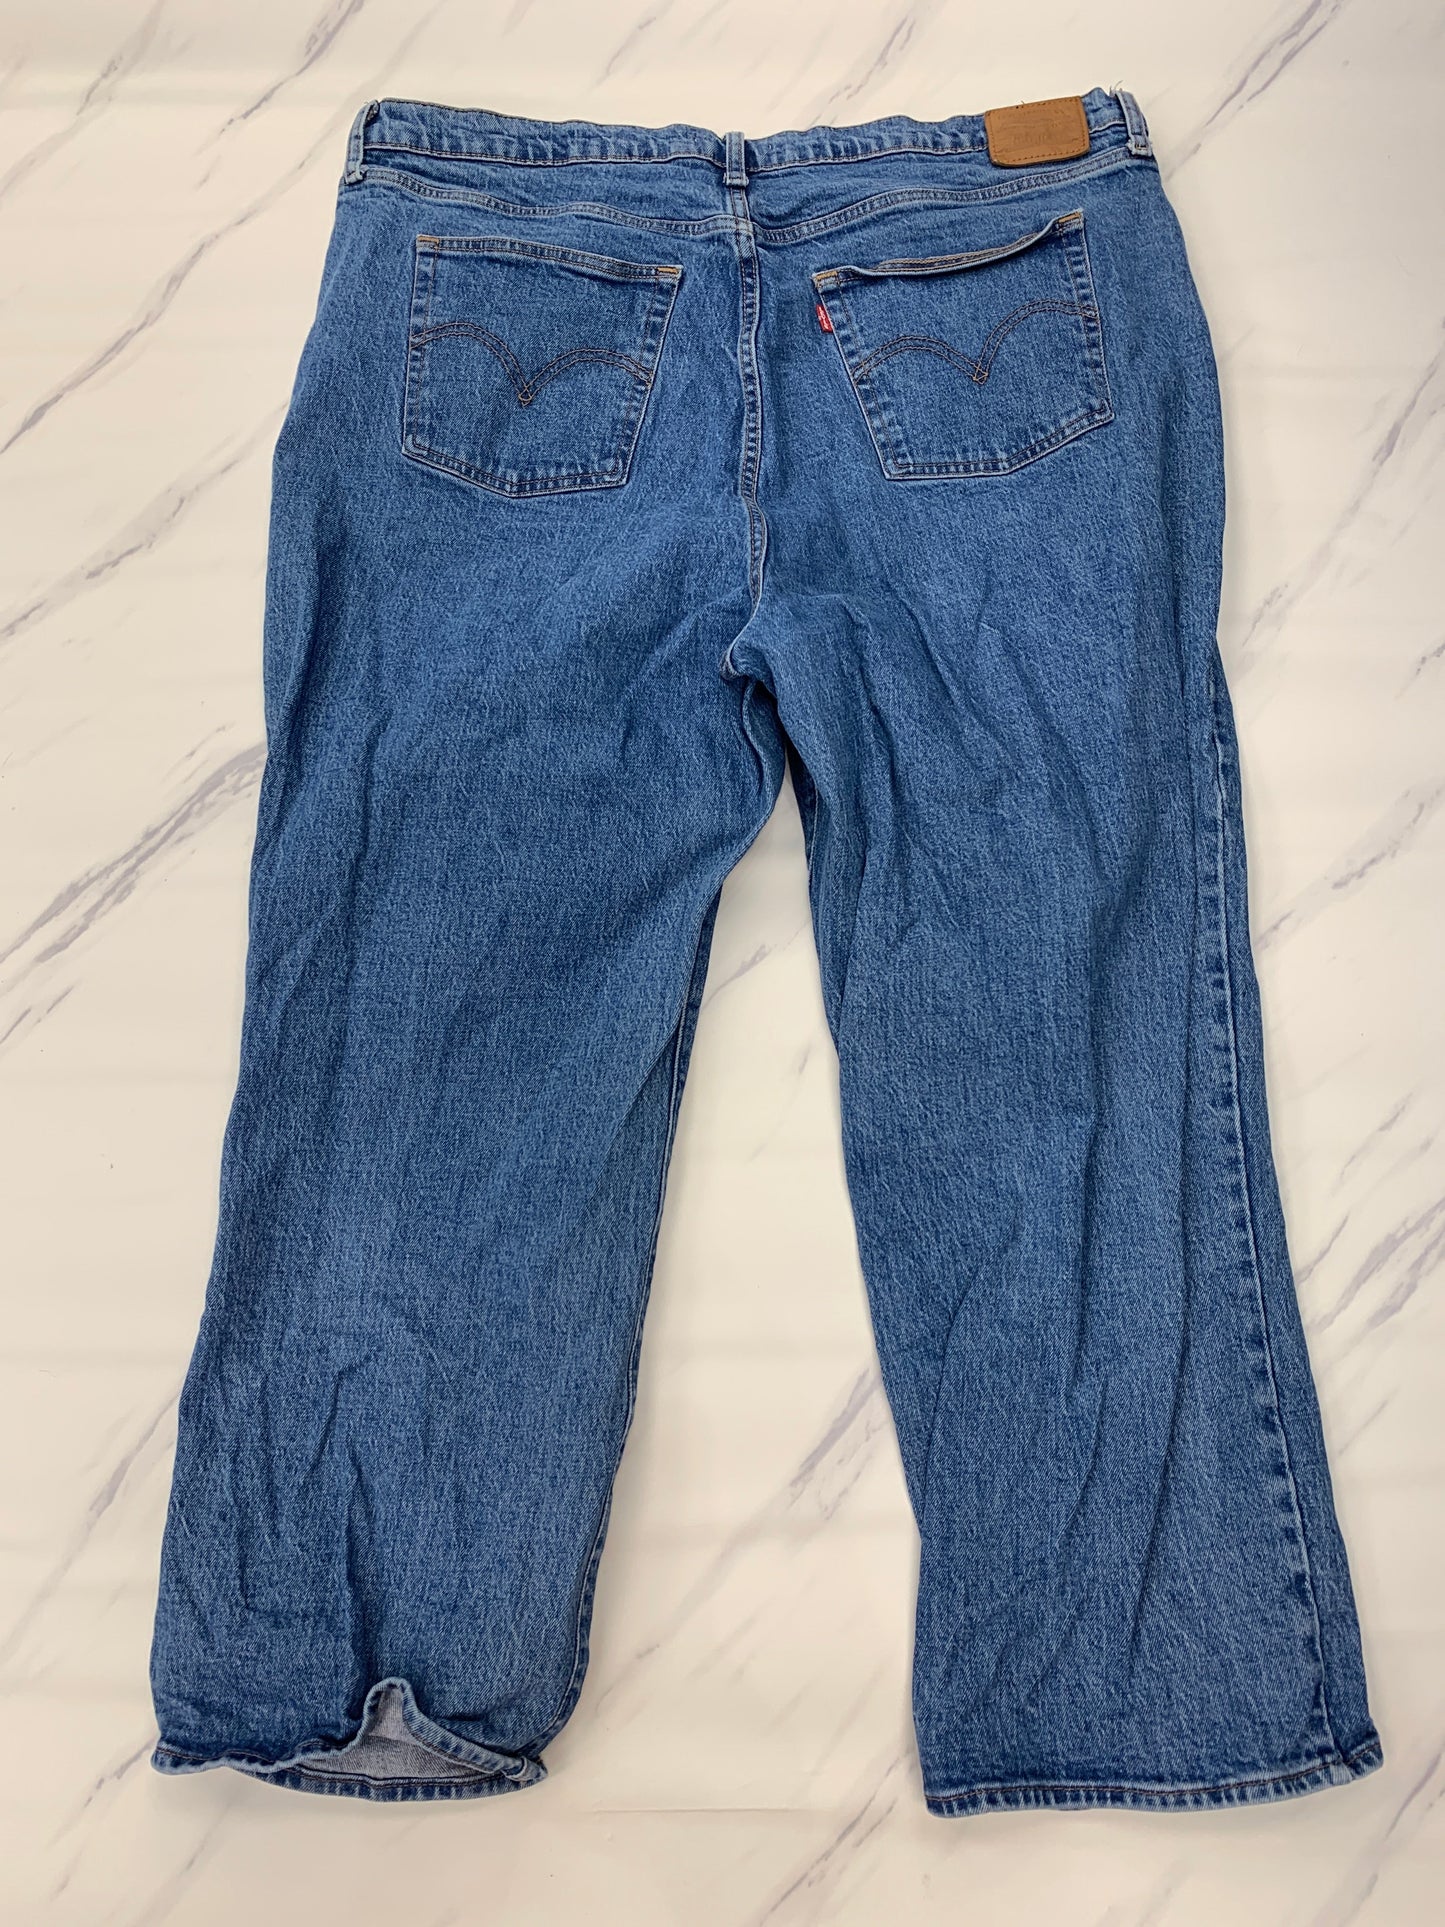 Jeans Straight Levis, Size 22w